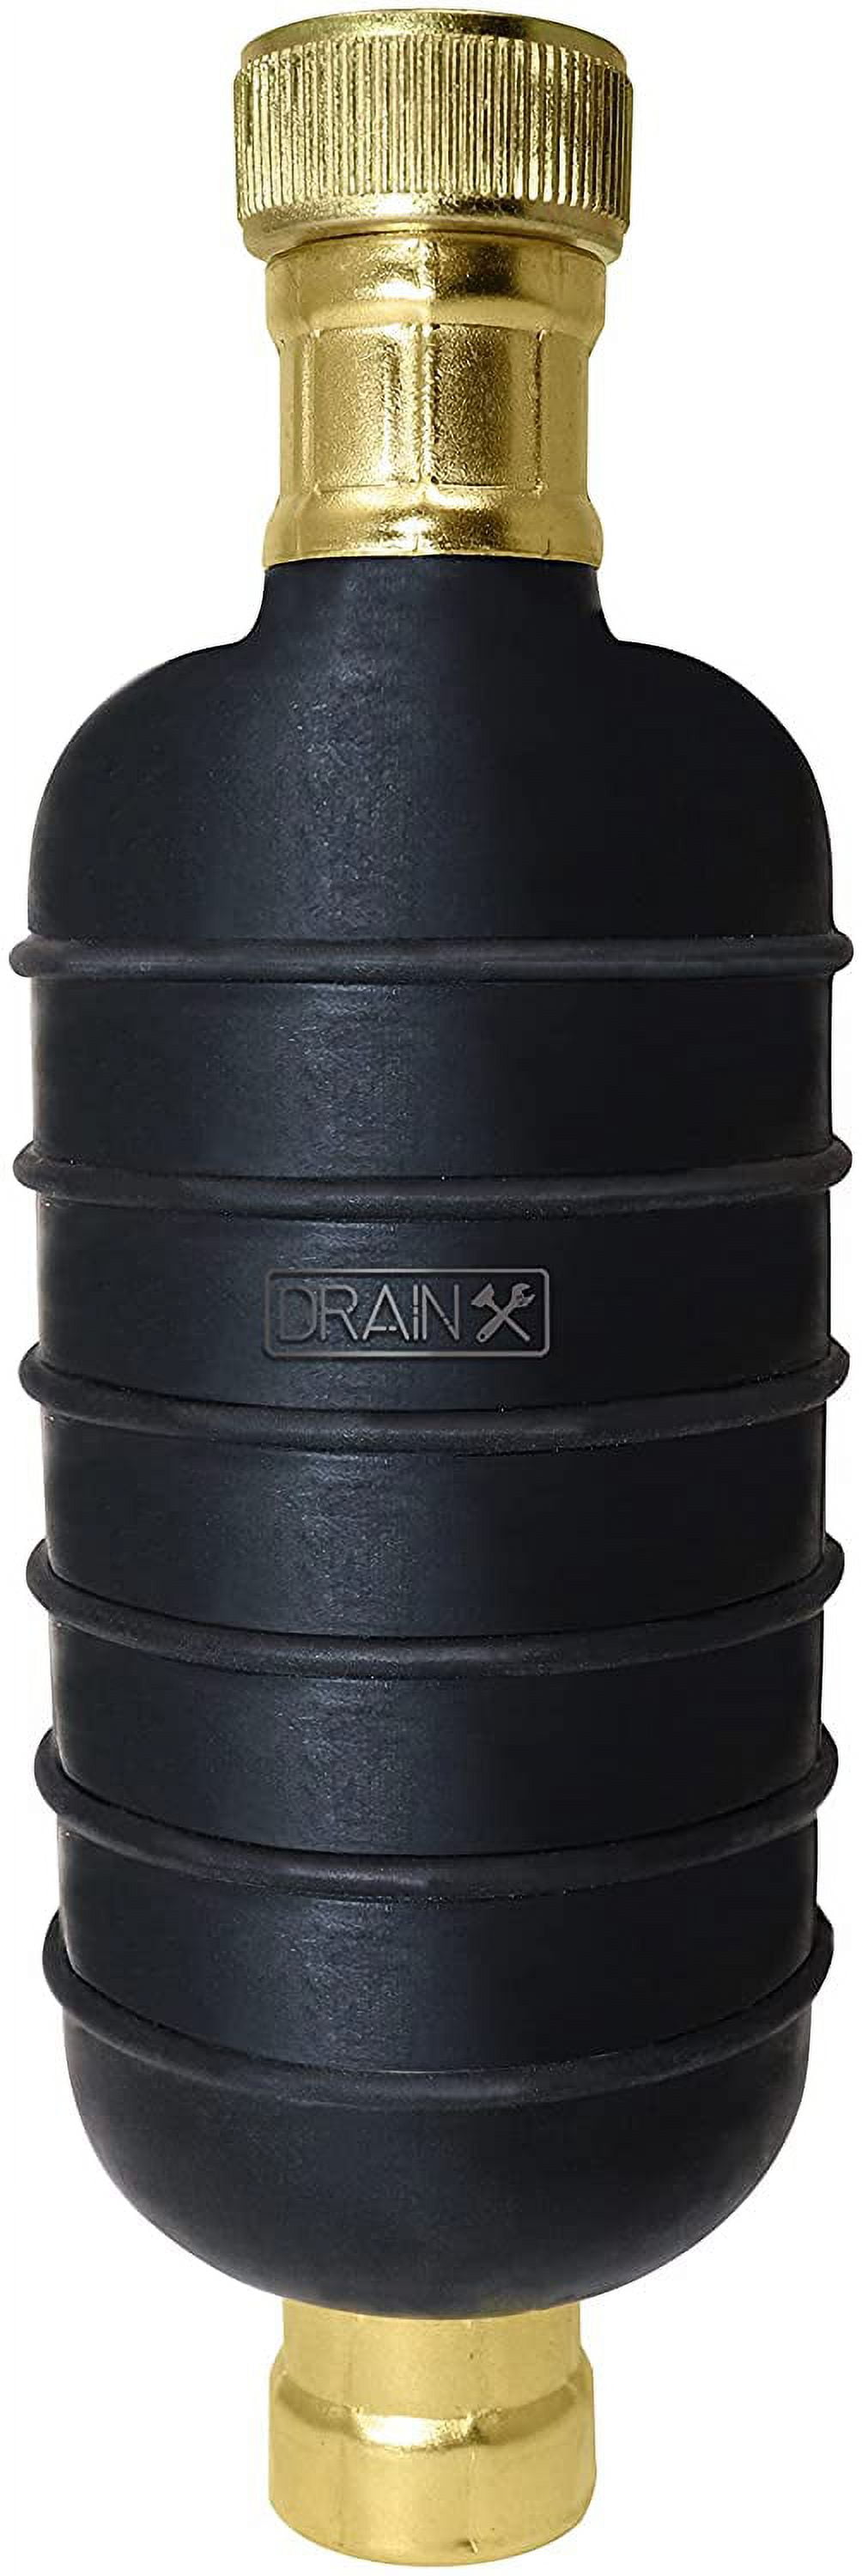 DrainX Hydro Pressure Drain Cleaning Bladder Pro - Fits 4 to 6